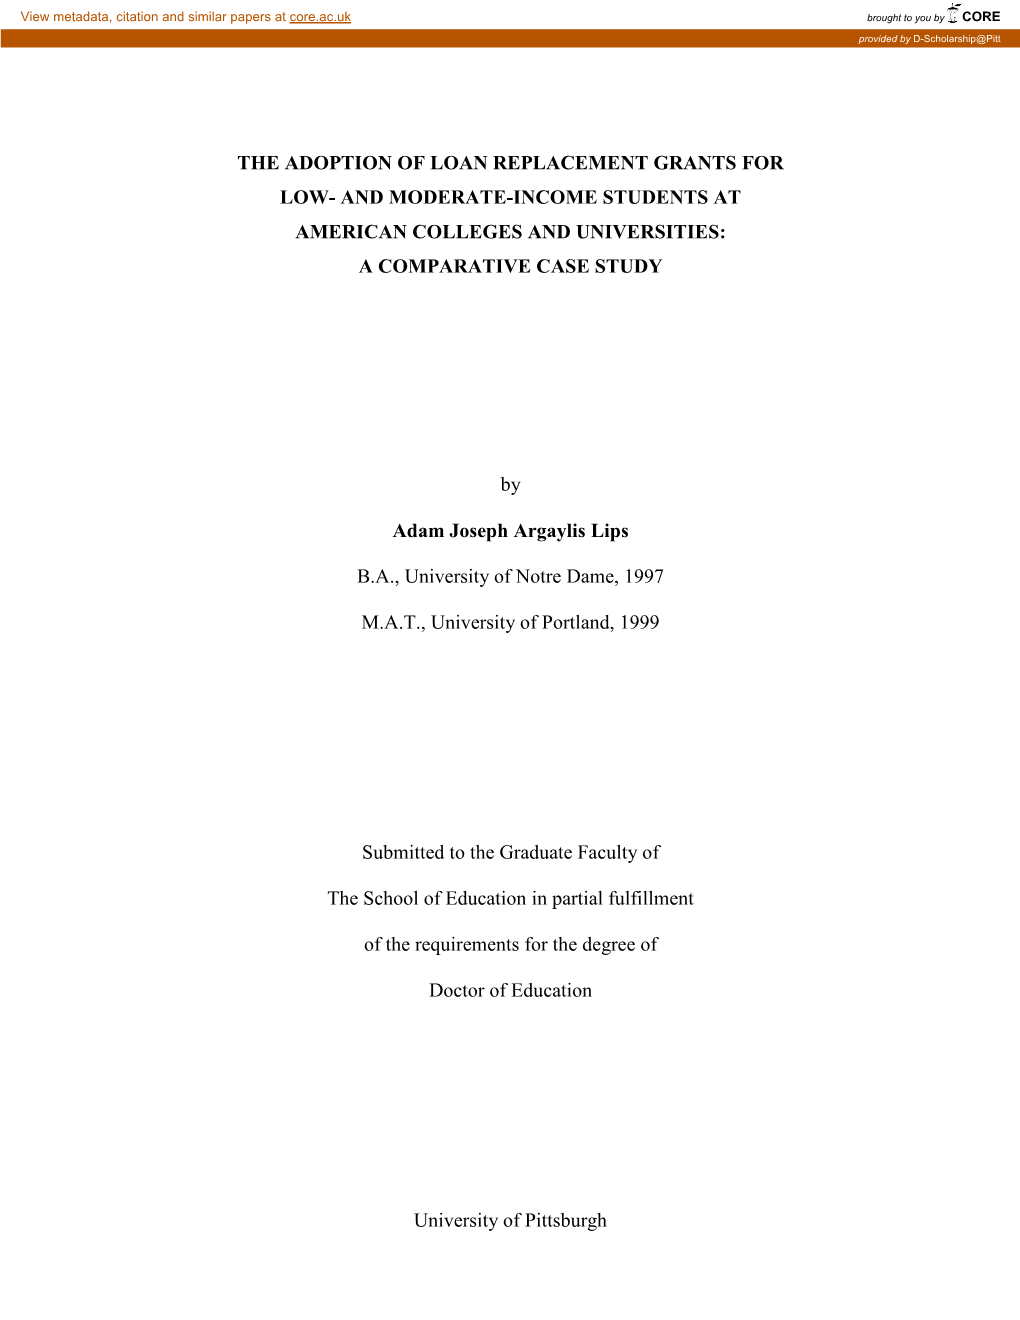 The Adoption of Loan Replacement Grants for Low- and Moderate-Income Students at American Colleges and Universities: a Comparative Case Study